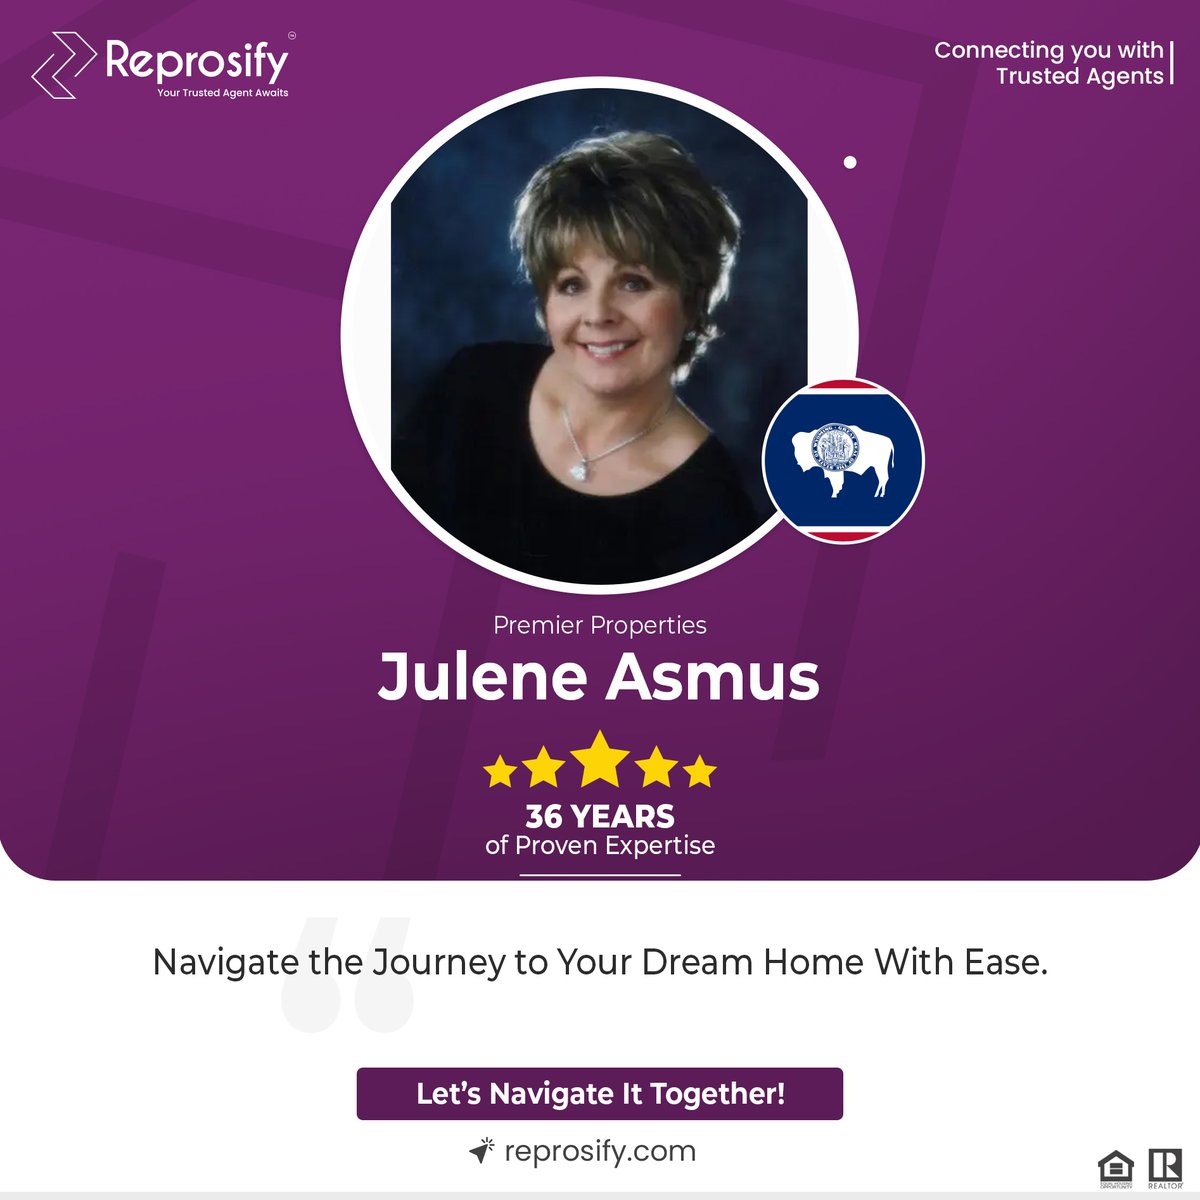 Bring your imagined home to life with Julene Asmus in Wyoming.

👤agents.reprosify.com/julene-asmus
.
#Reprosify #AgentsReprosify #PremierProperties #JuleneAsmus #realestate #realtor #realestateagent #Broker #Wyomingrealestate #Torringtonrealestate